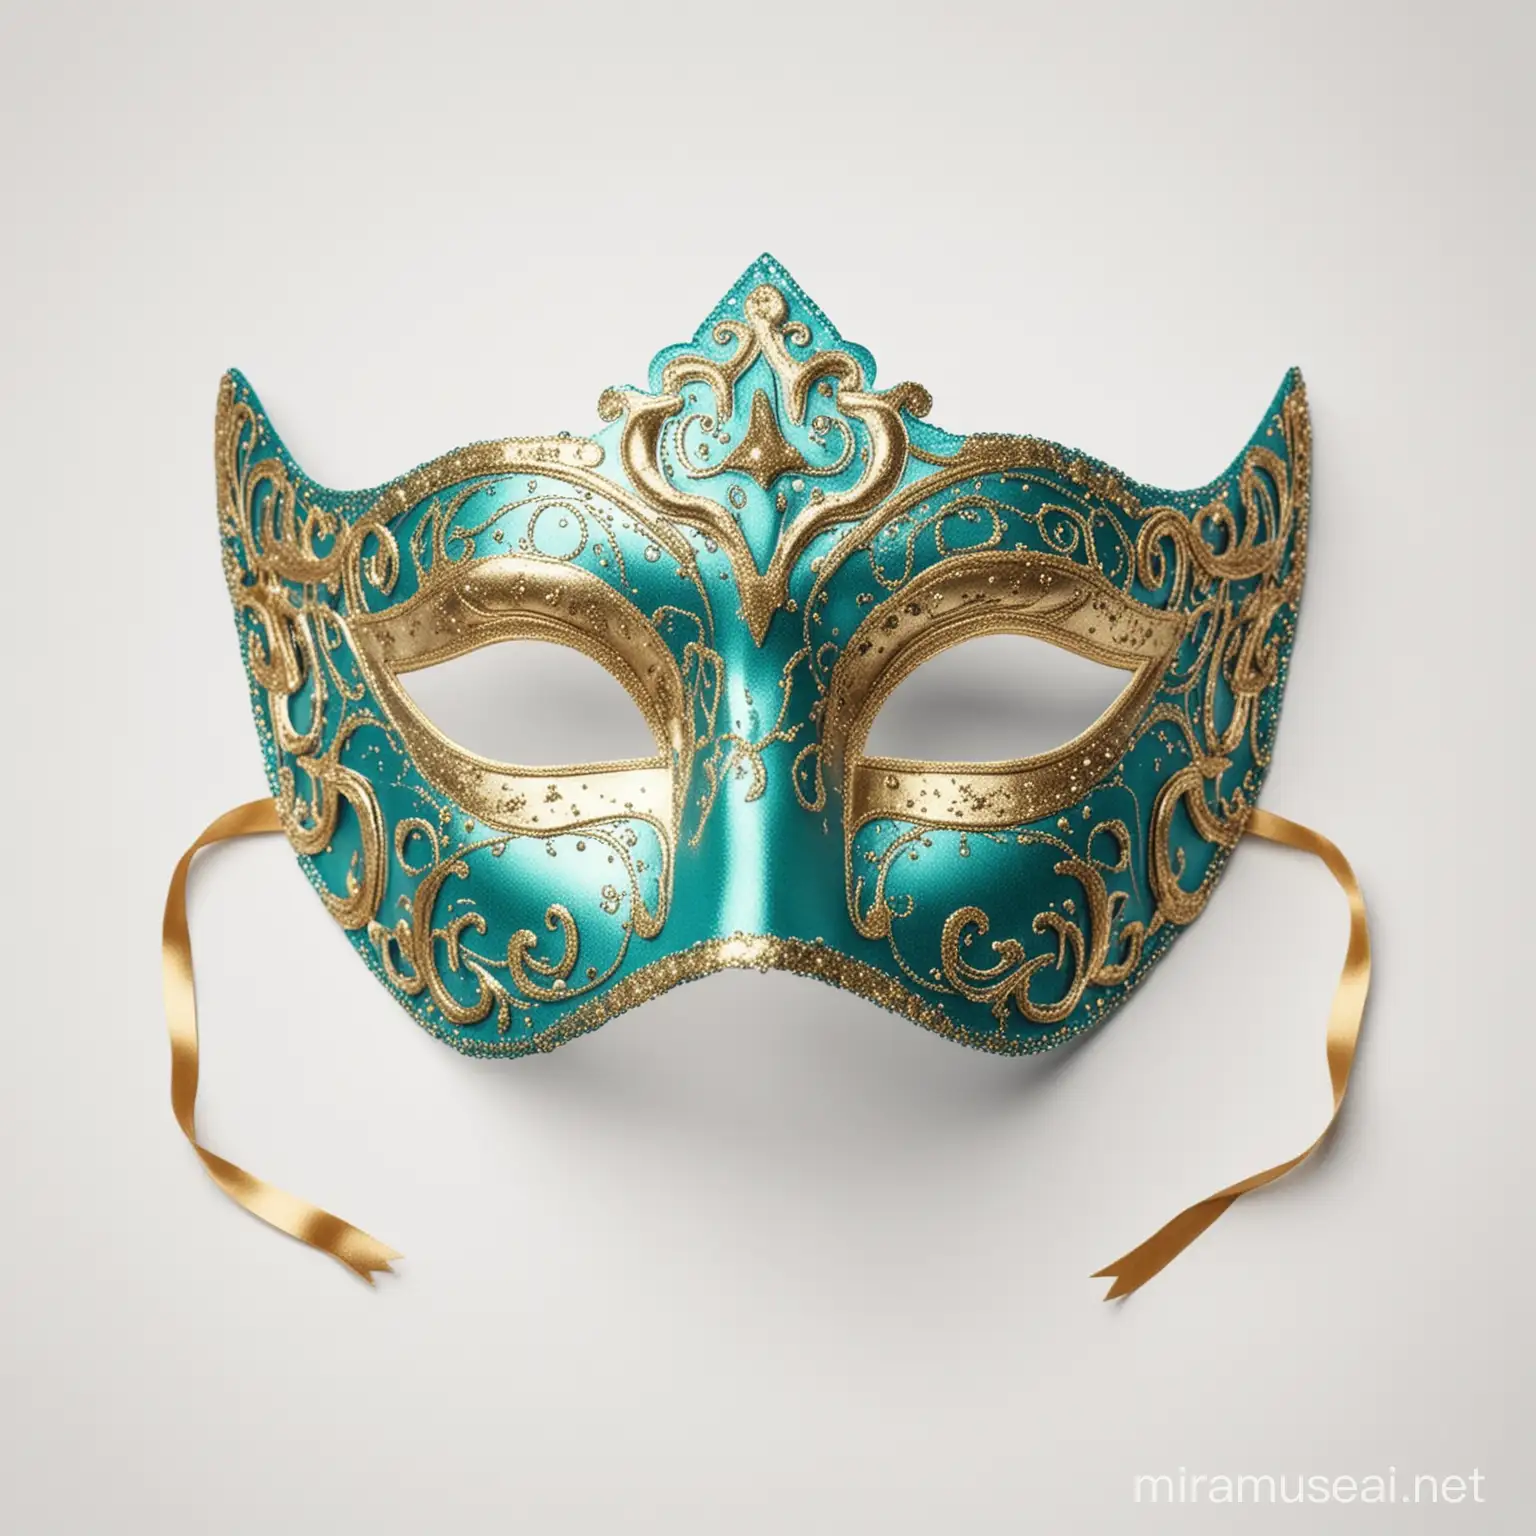 Shimmering Teal and Gold Carnival Mask on White Background